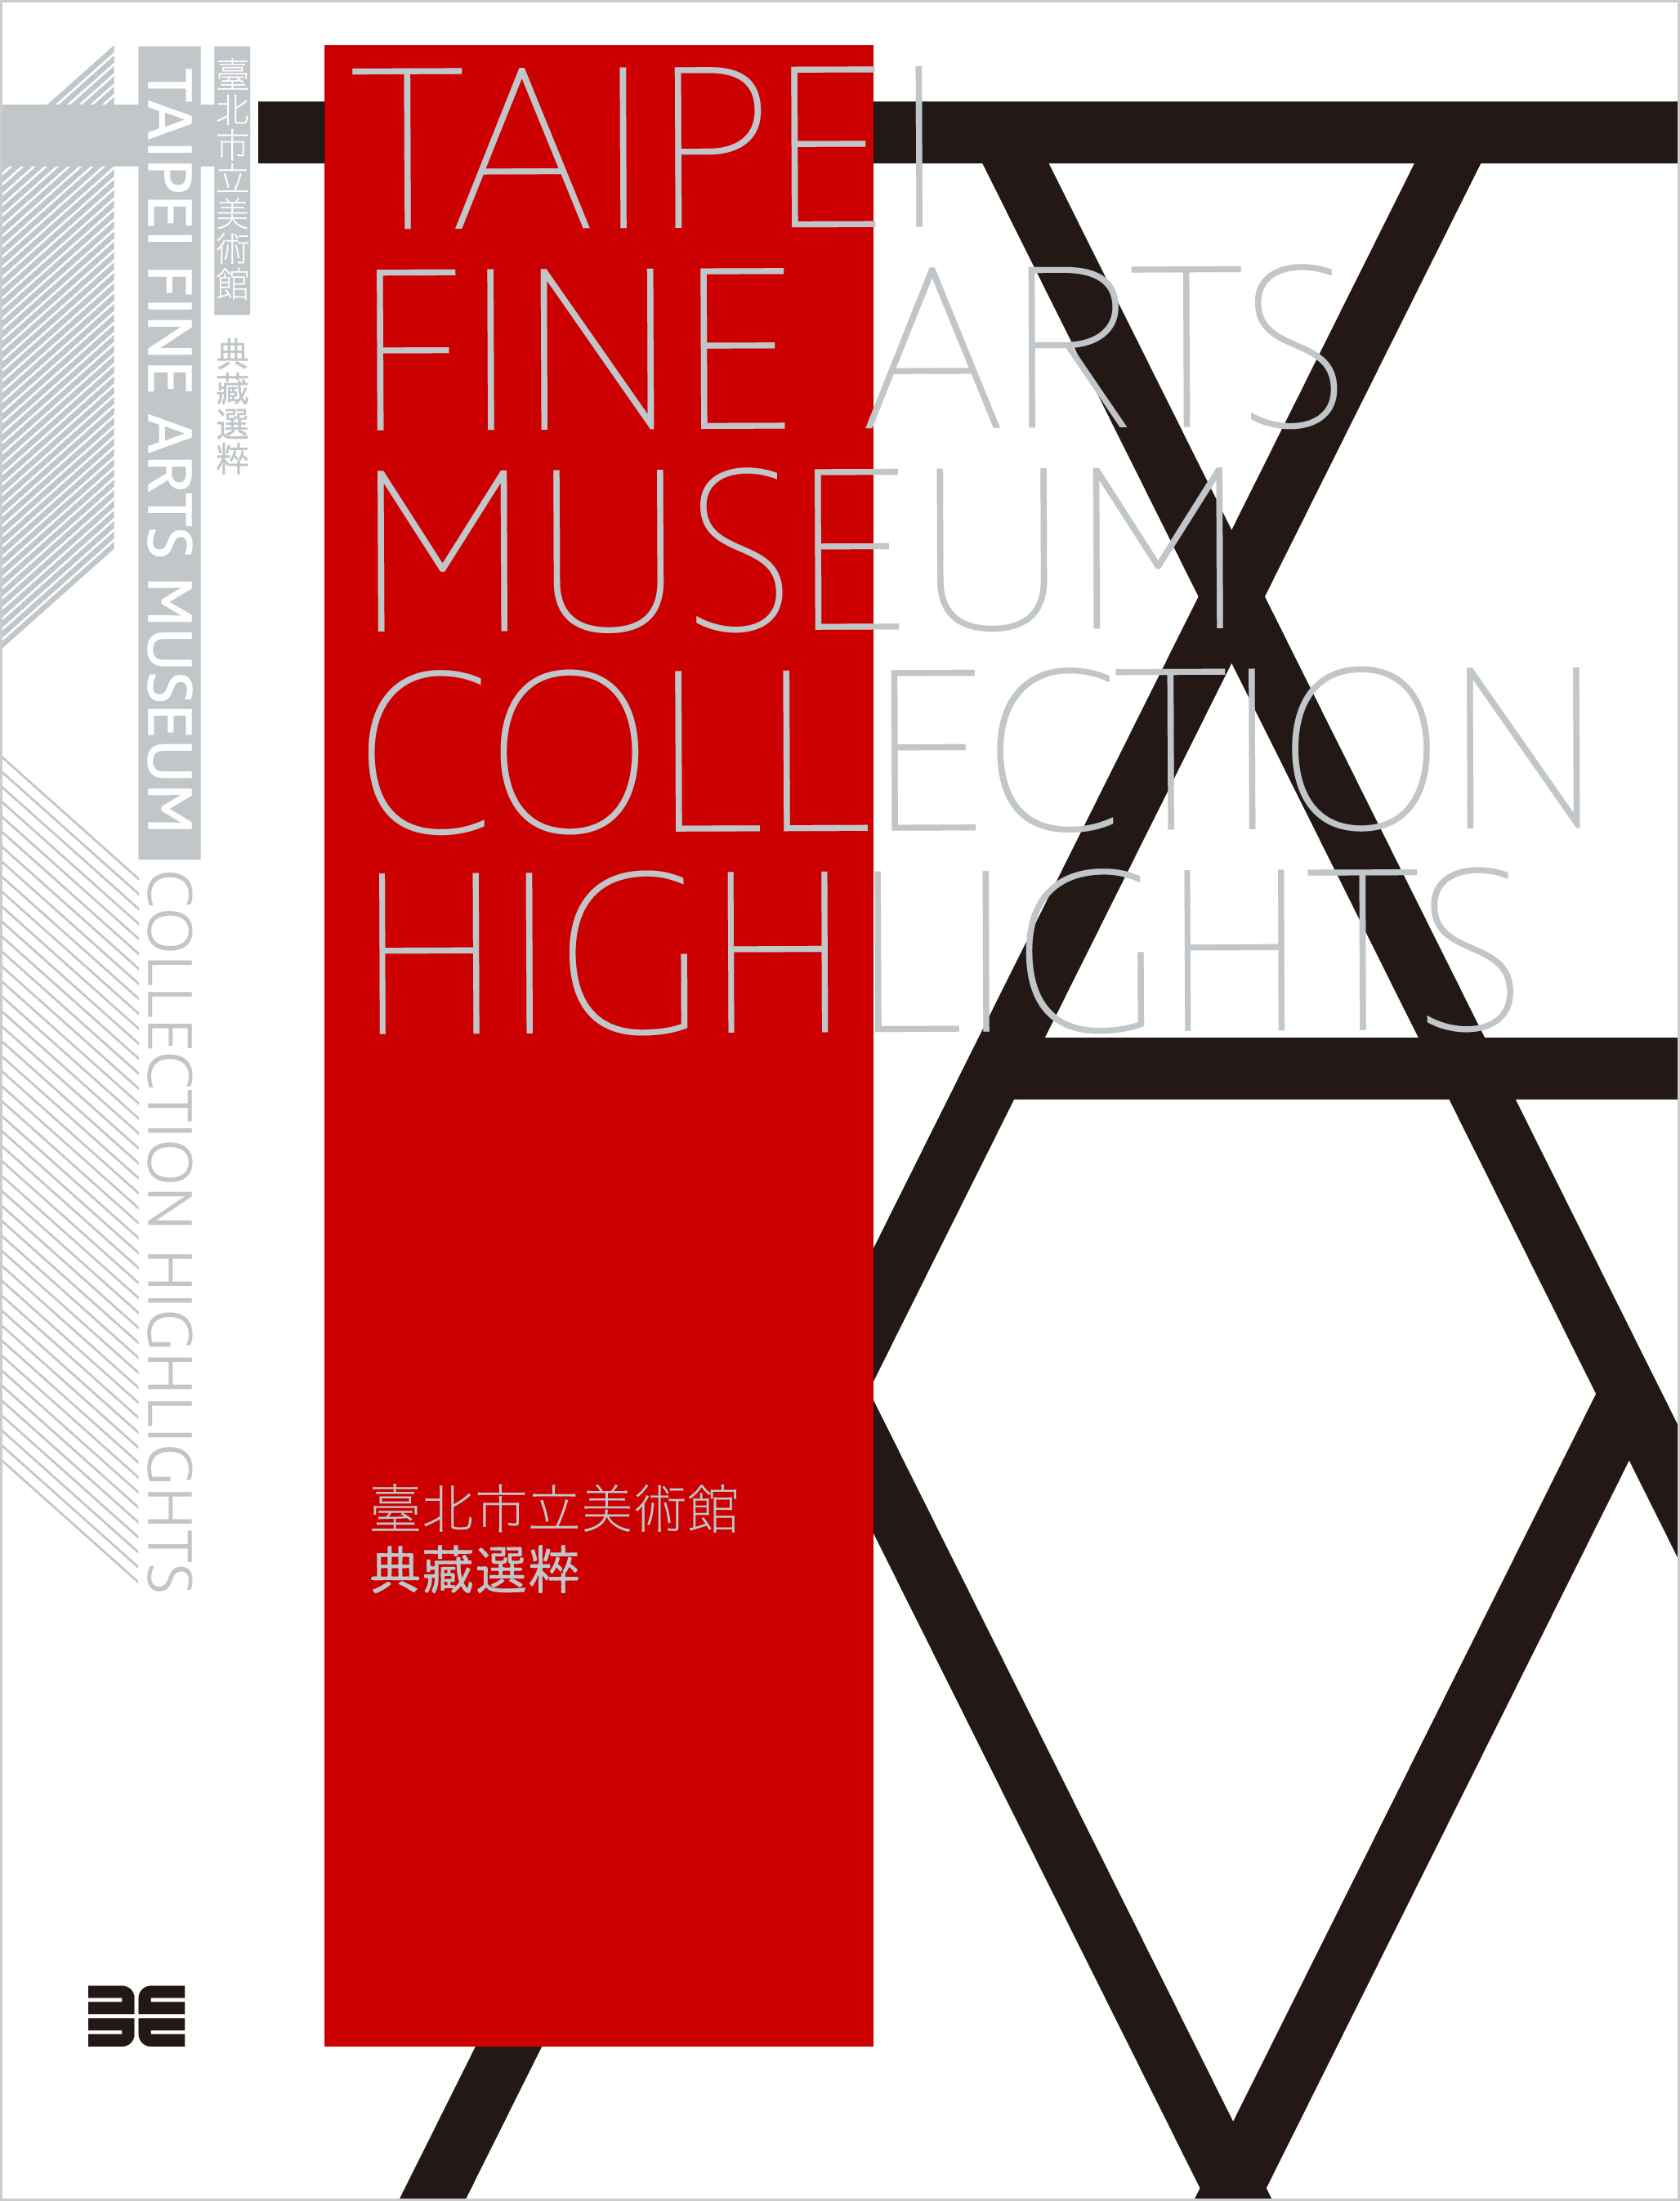 Taipei Fine Arts Museum Collection Highlights 的圖說